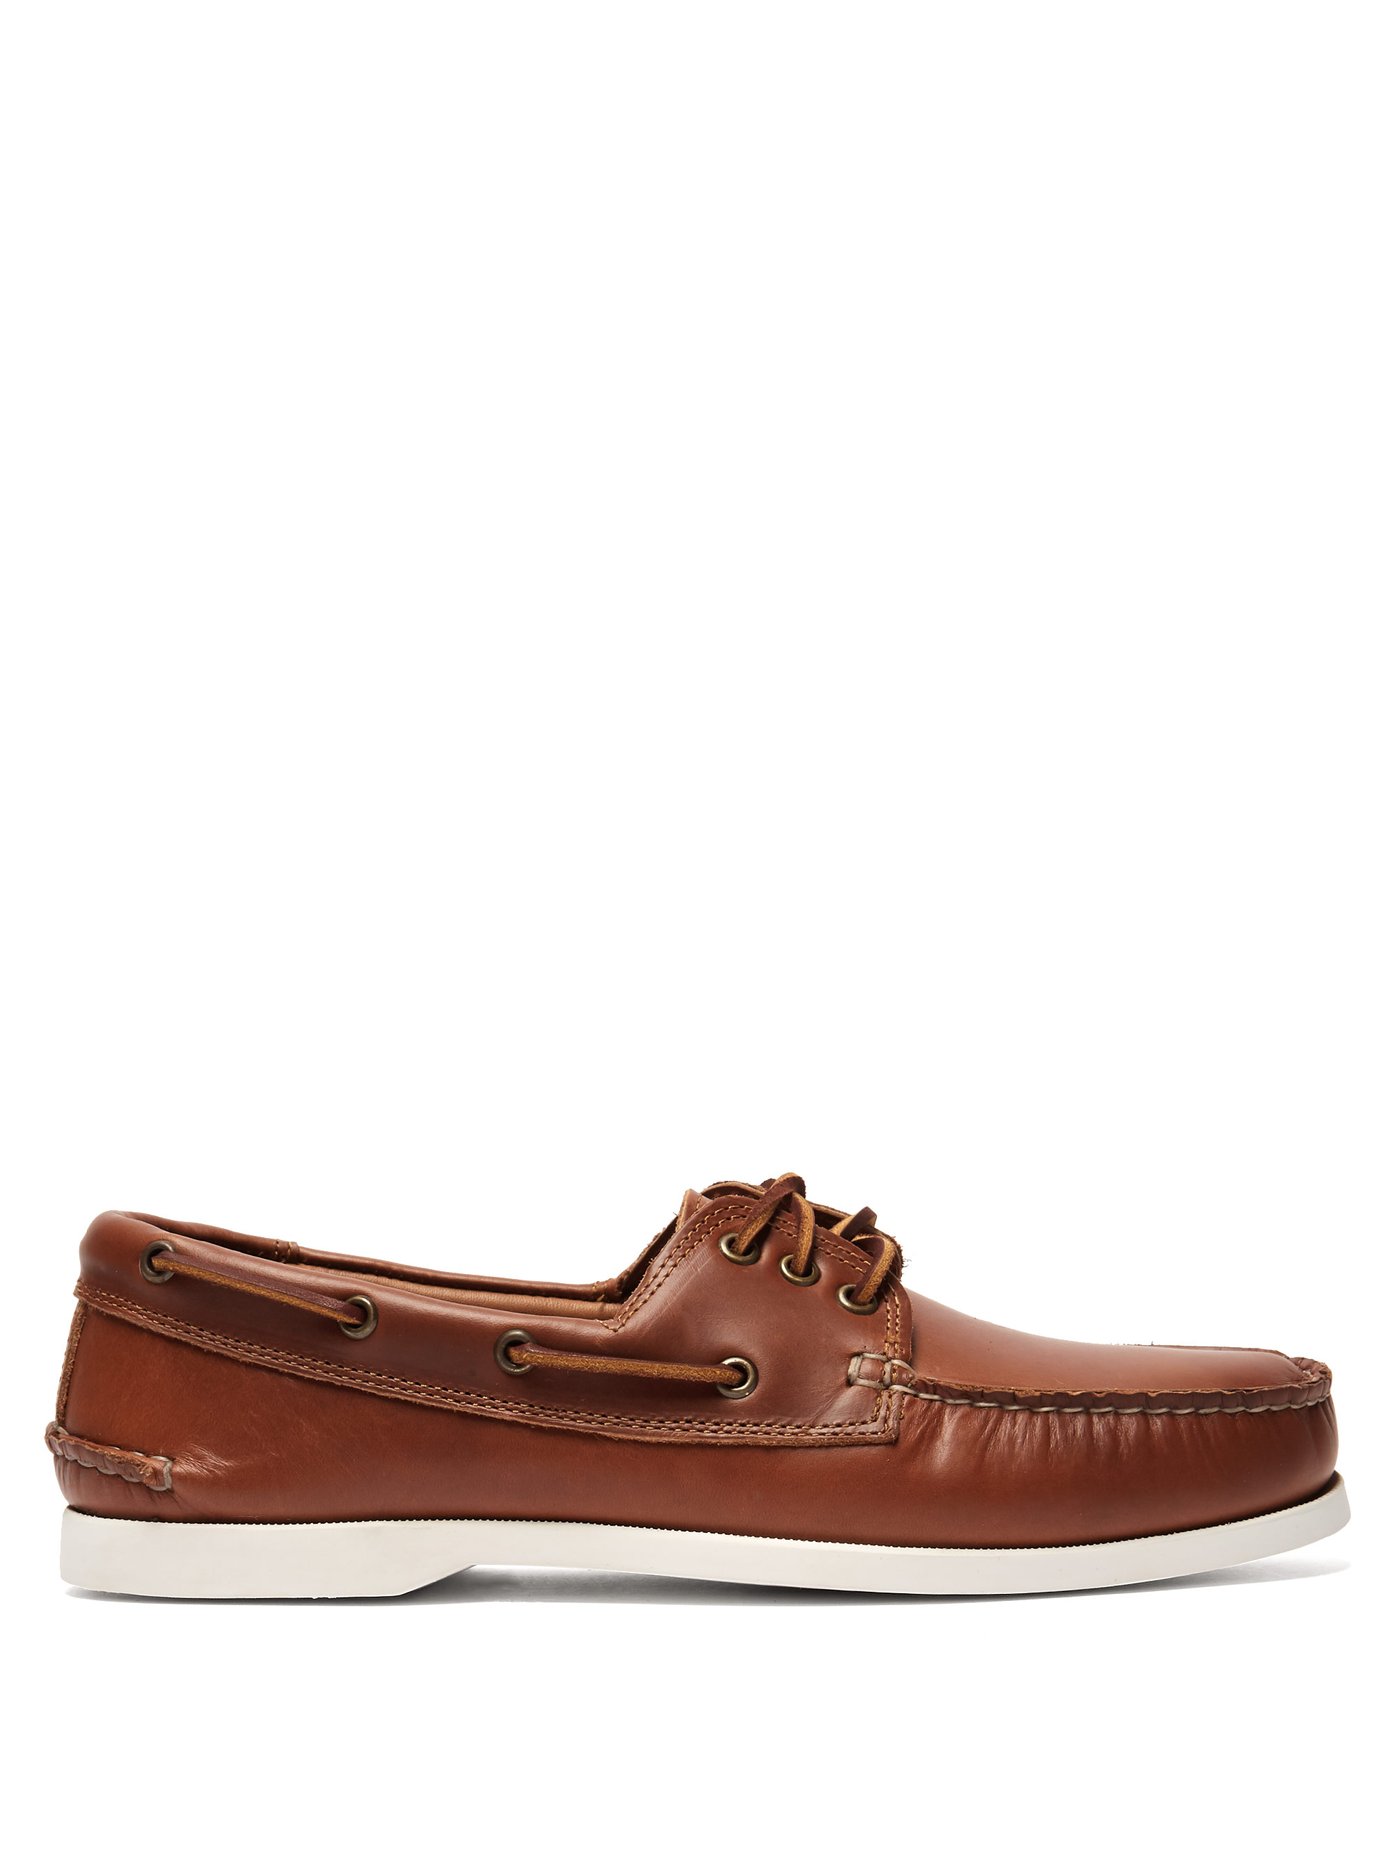 where to buy boat shoes near me